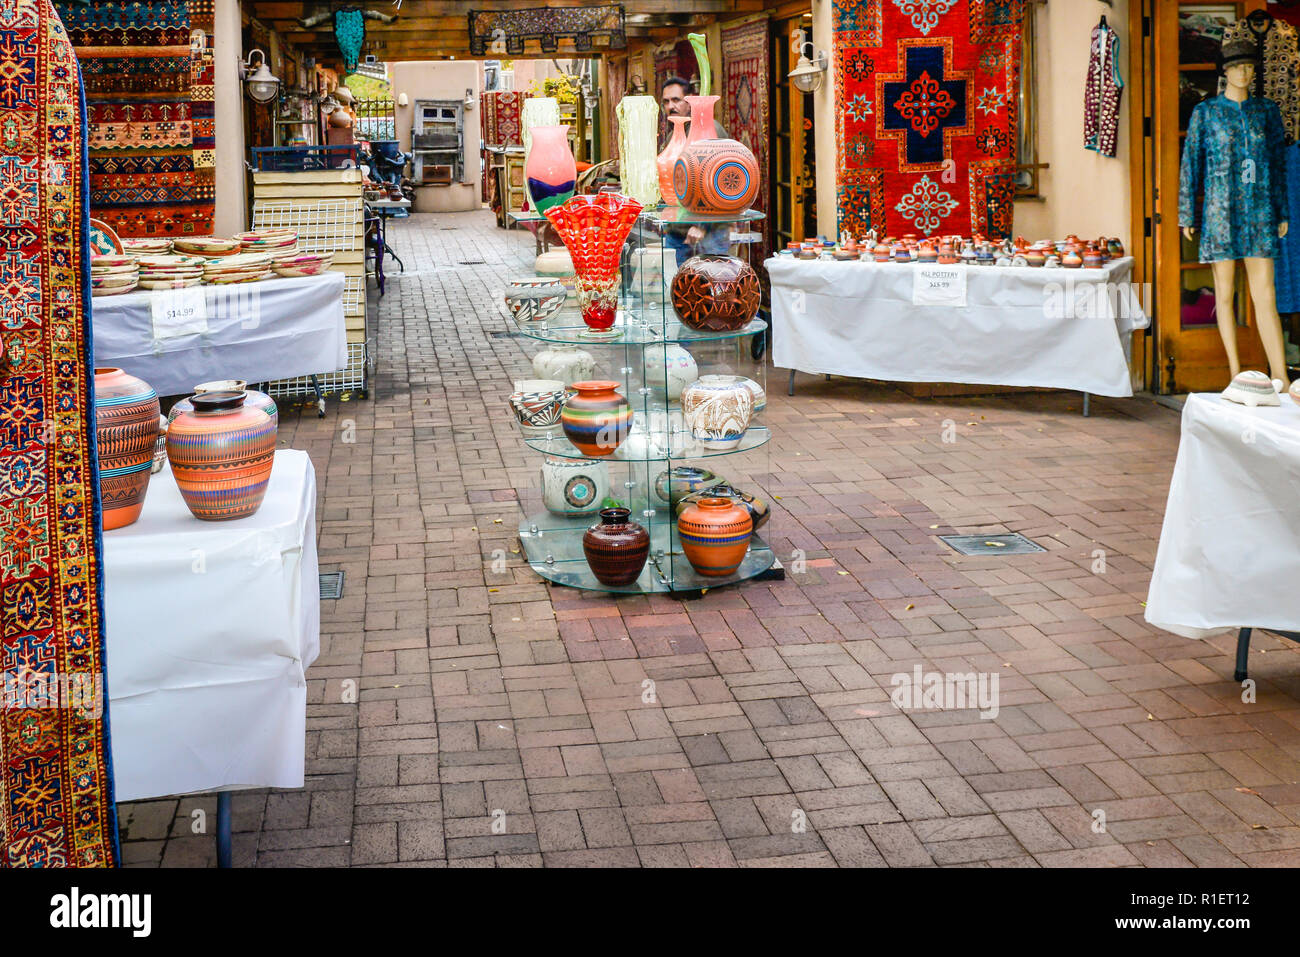 One of many outdoor arcade style shopping areas selling pots and rugs in historic downtown Santa Fe, NM Stock Photo